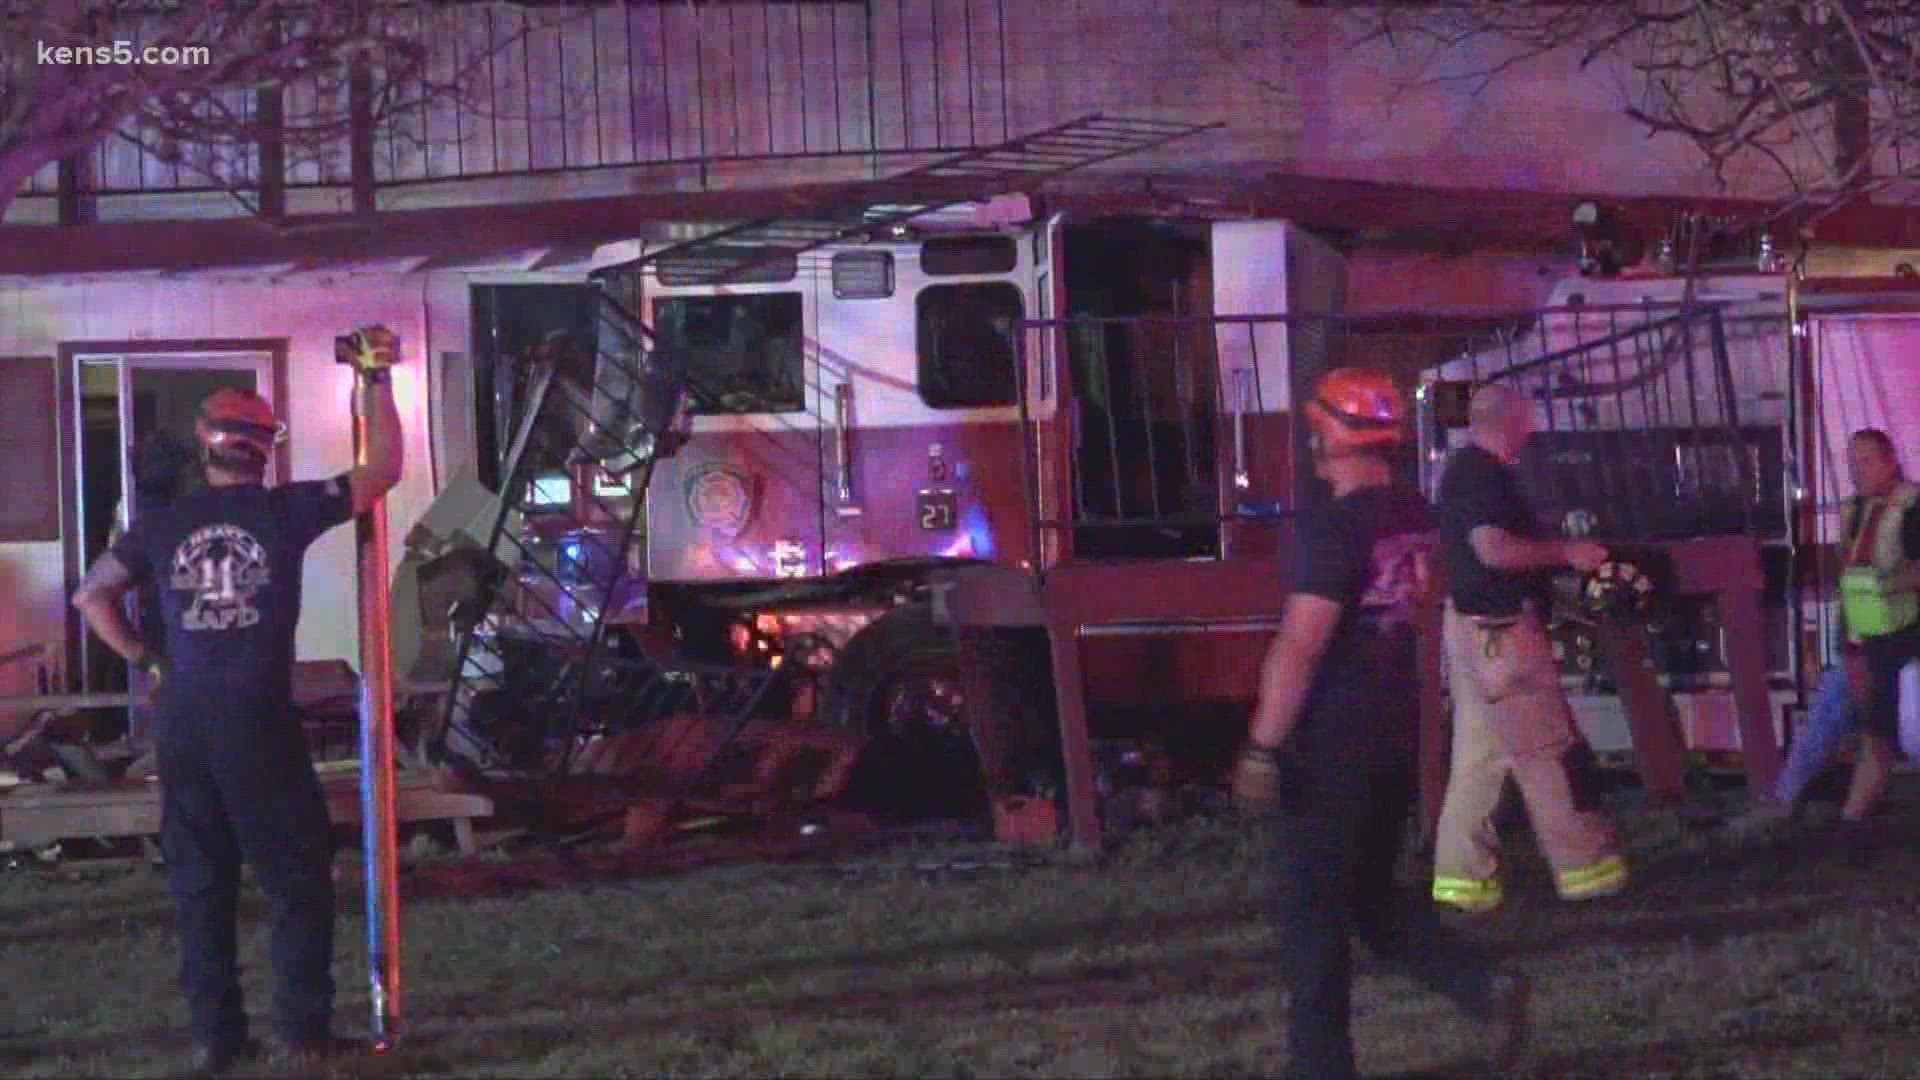 A speeding car hit a San Antonio fire truck, causing it to crash into an apartment building on Tuesday night.